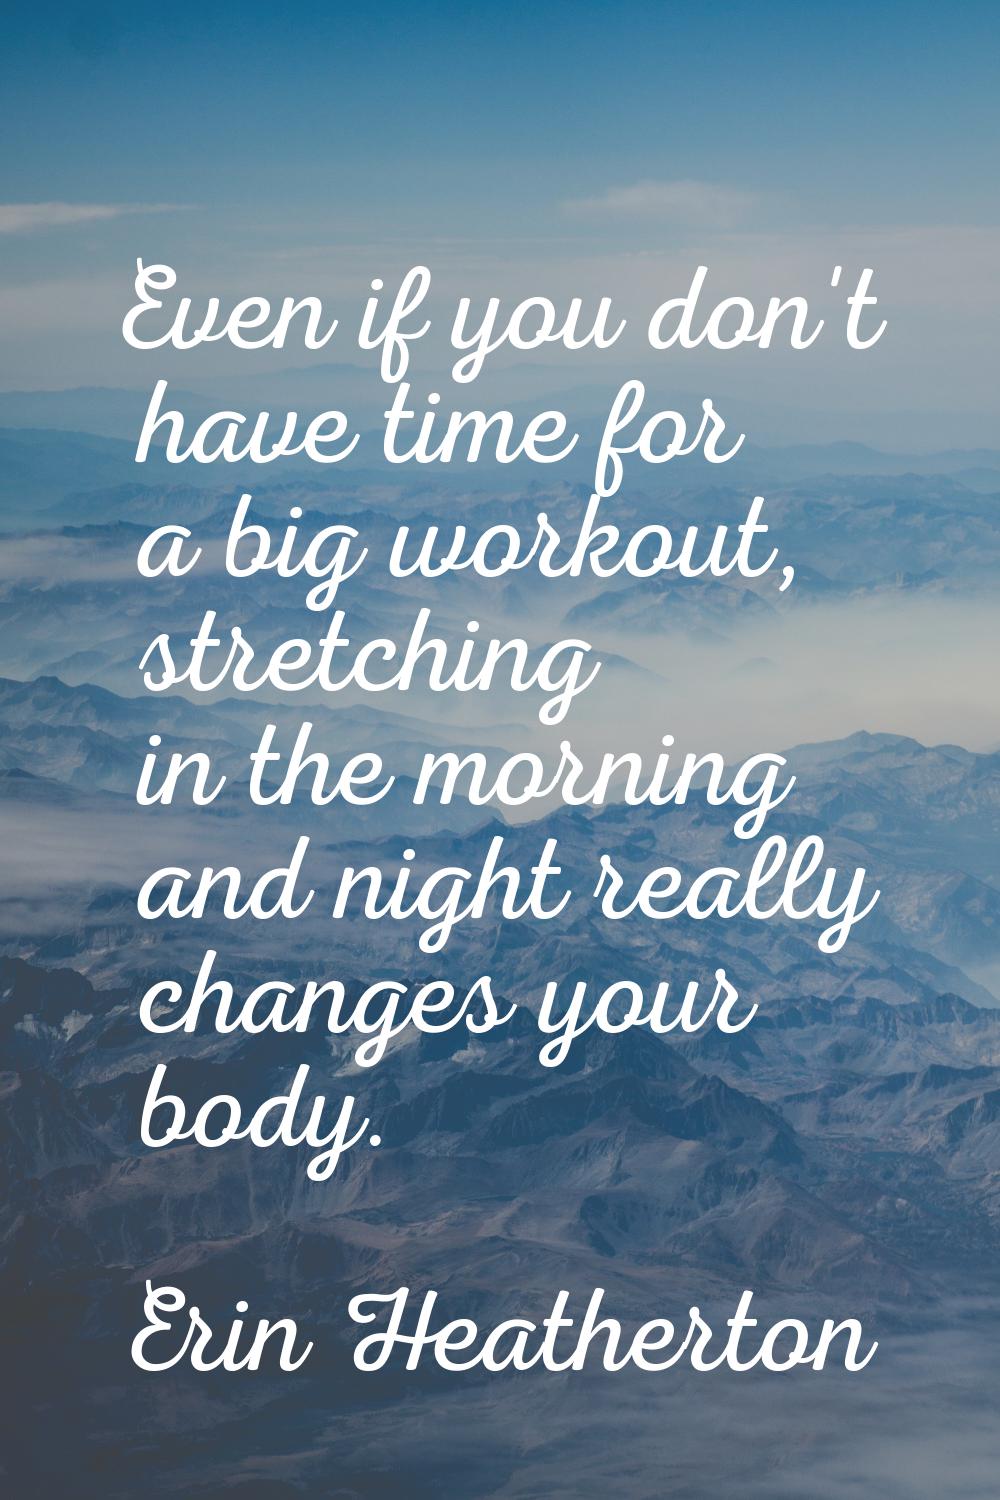 Even if you don't have time for a big workout, stretching in the morning and night really changes y